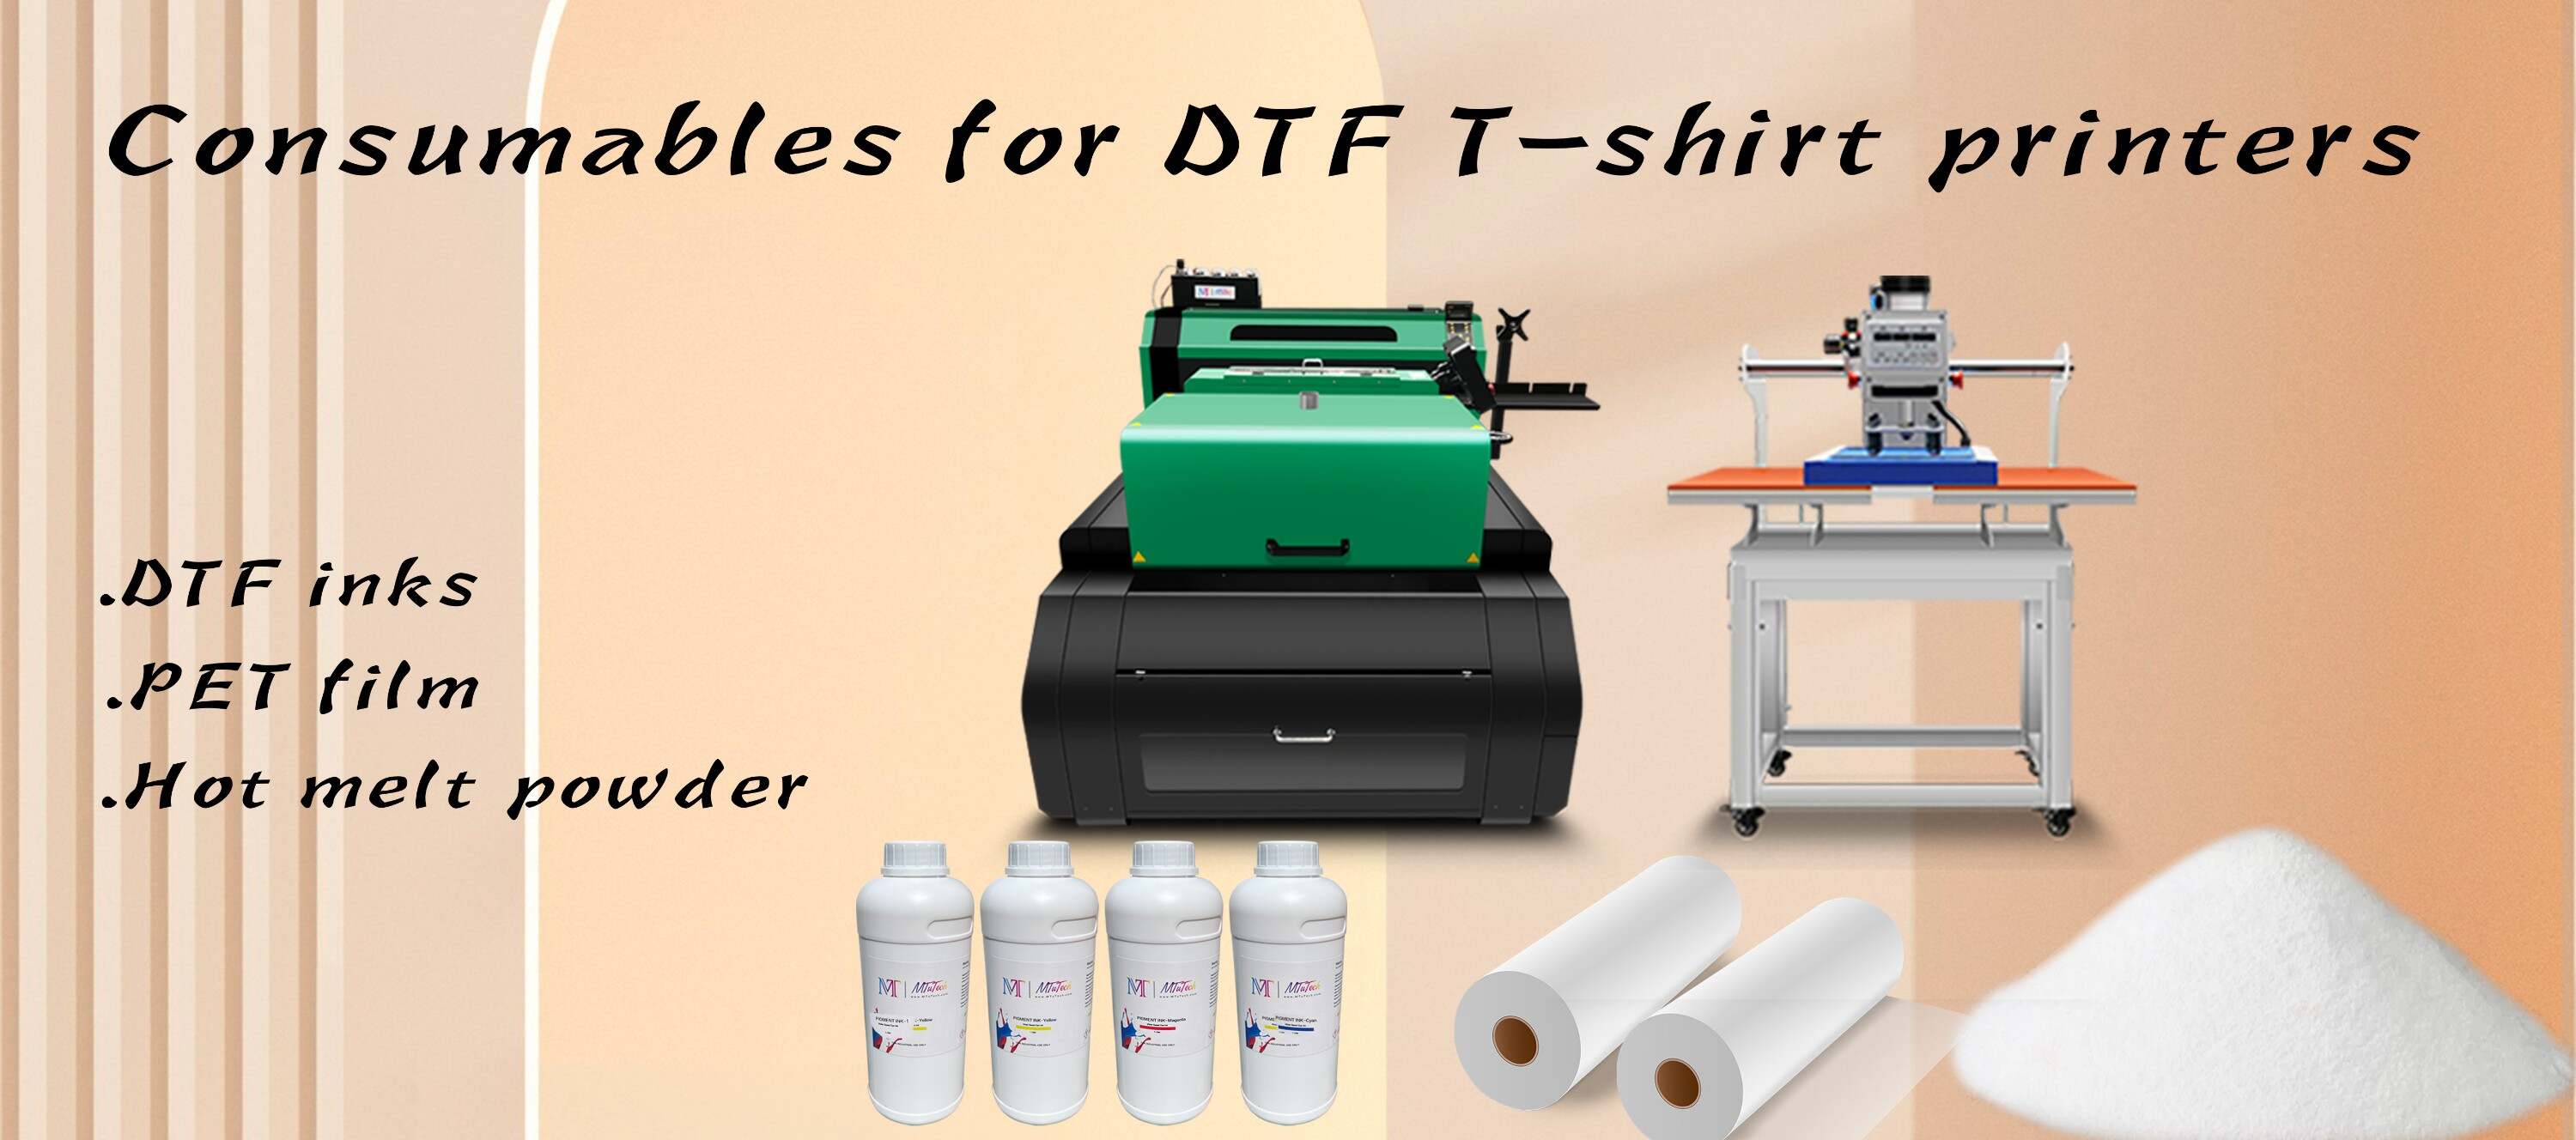 Consumables for DTF T-shirt printers